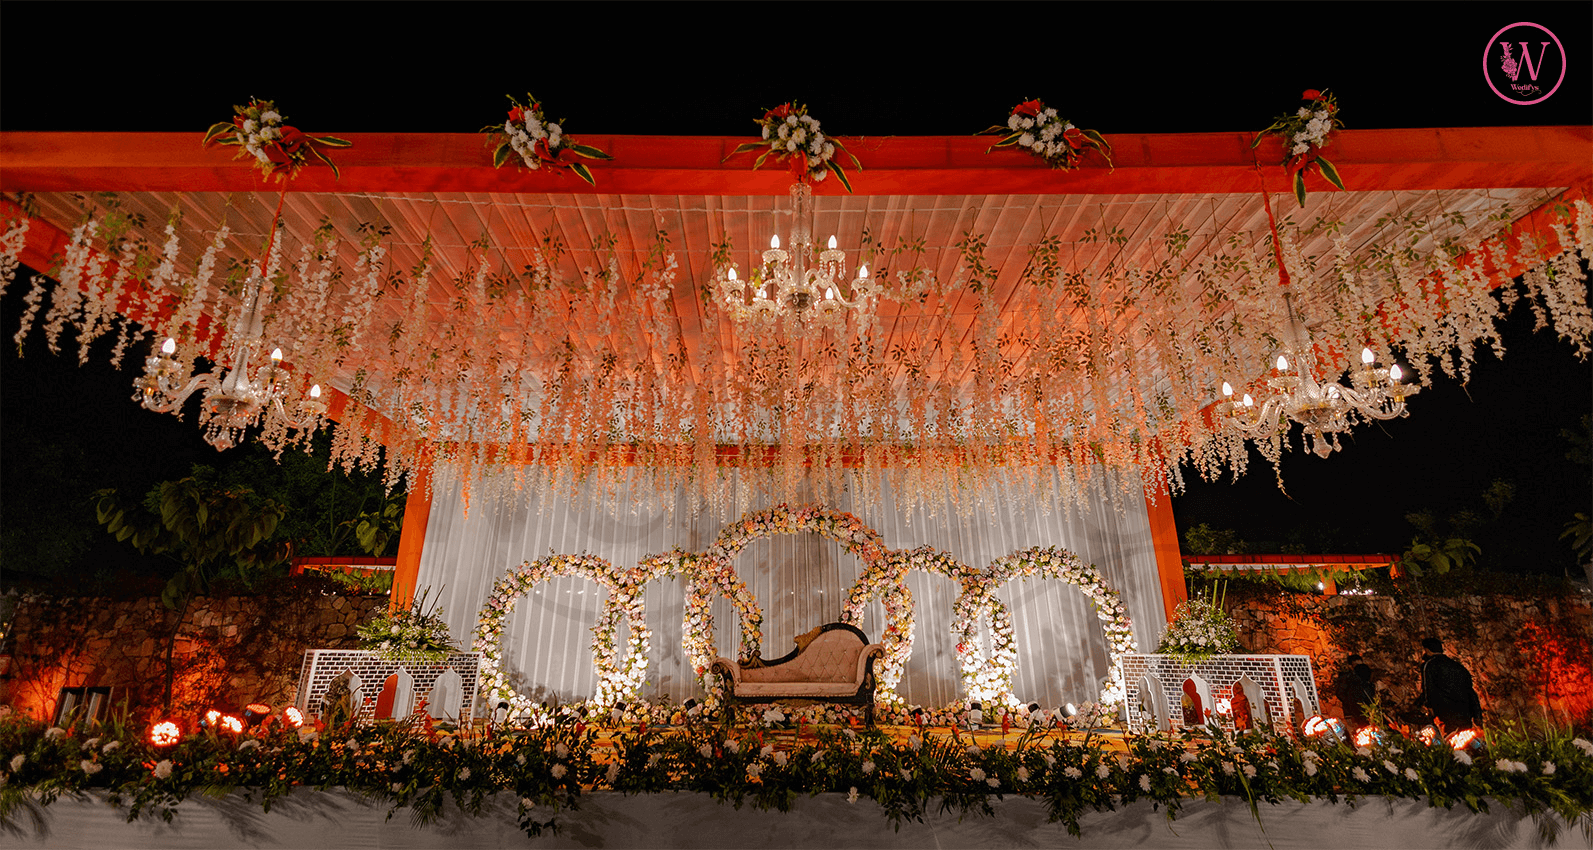 exquisite-wedding-stage-decoration-transforming-dreams-into-reality-1687922226